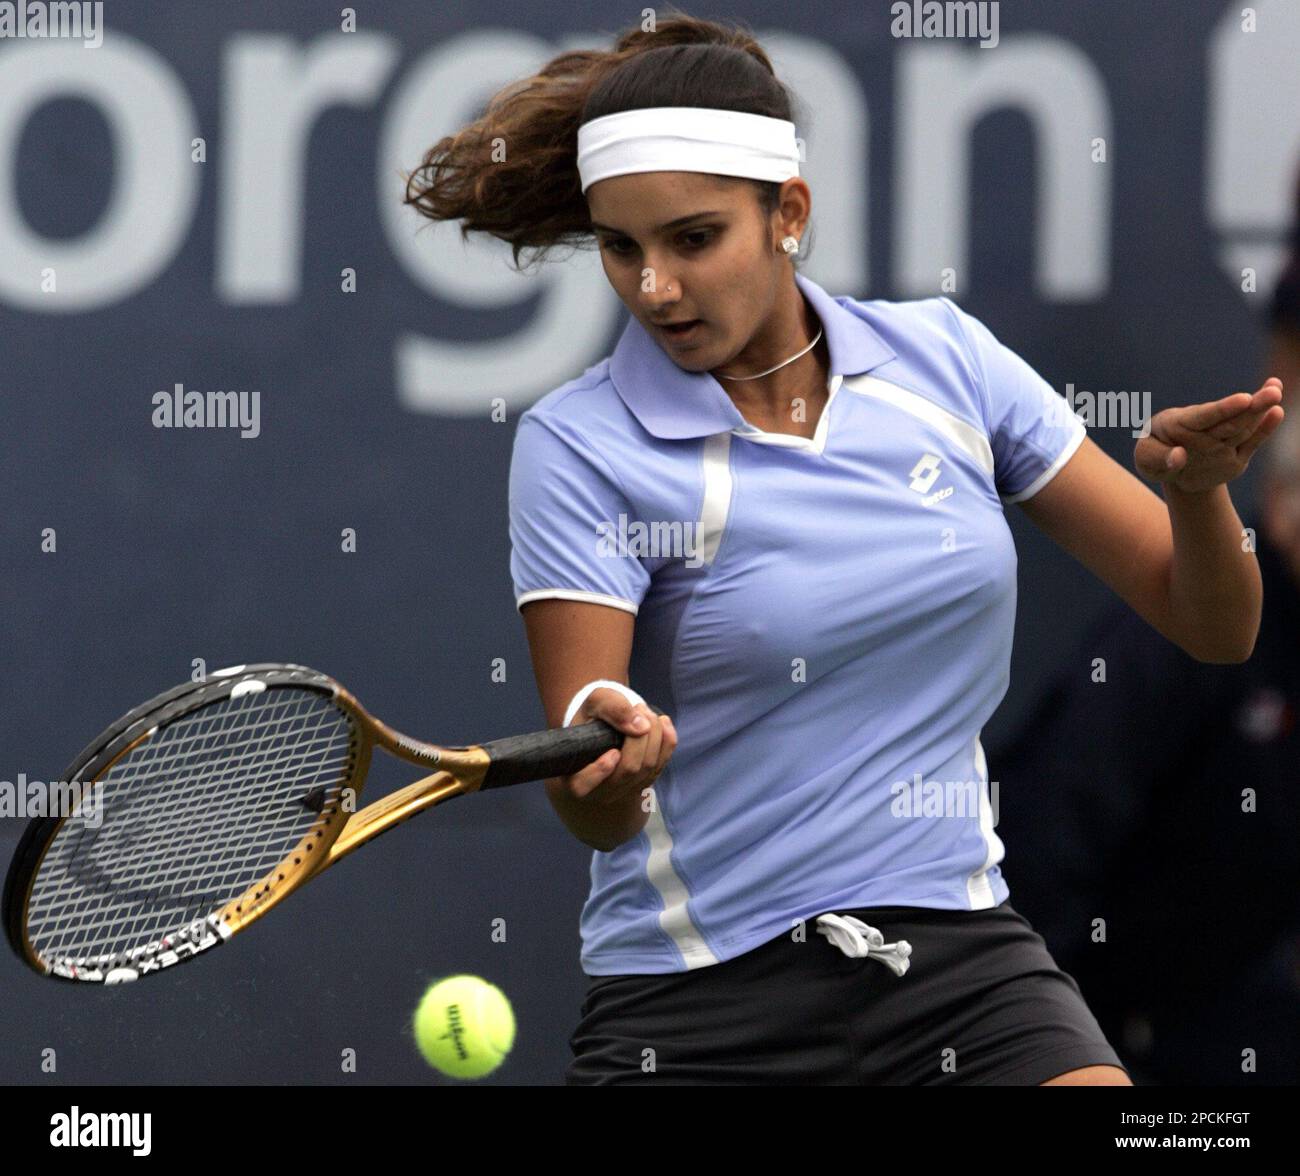 Sania Mirza of India hits a return to Francesca Schiavone of Italy at the US Open tennis tournament in New York, Thursday, Aug. 31, 2006. (AP Photo/Julie Jacobson) Stock Photo